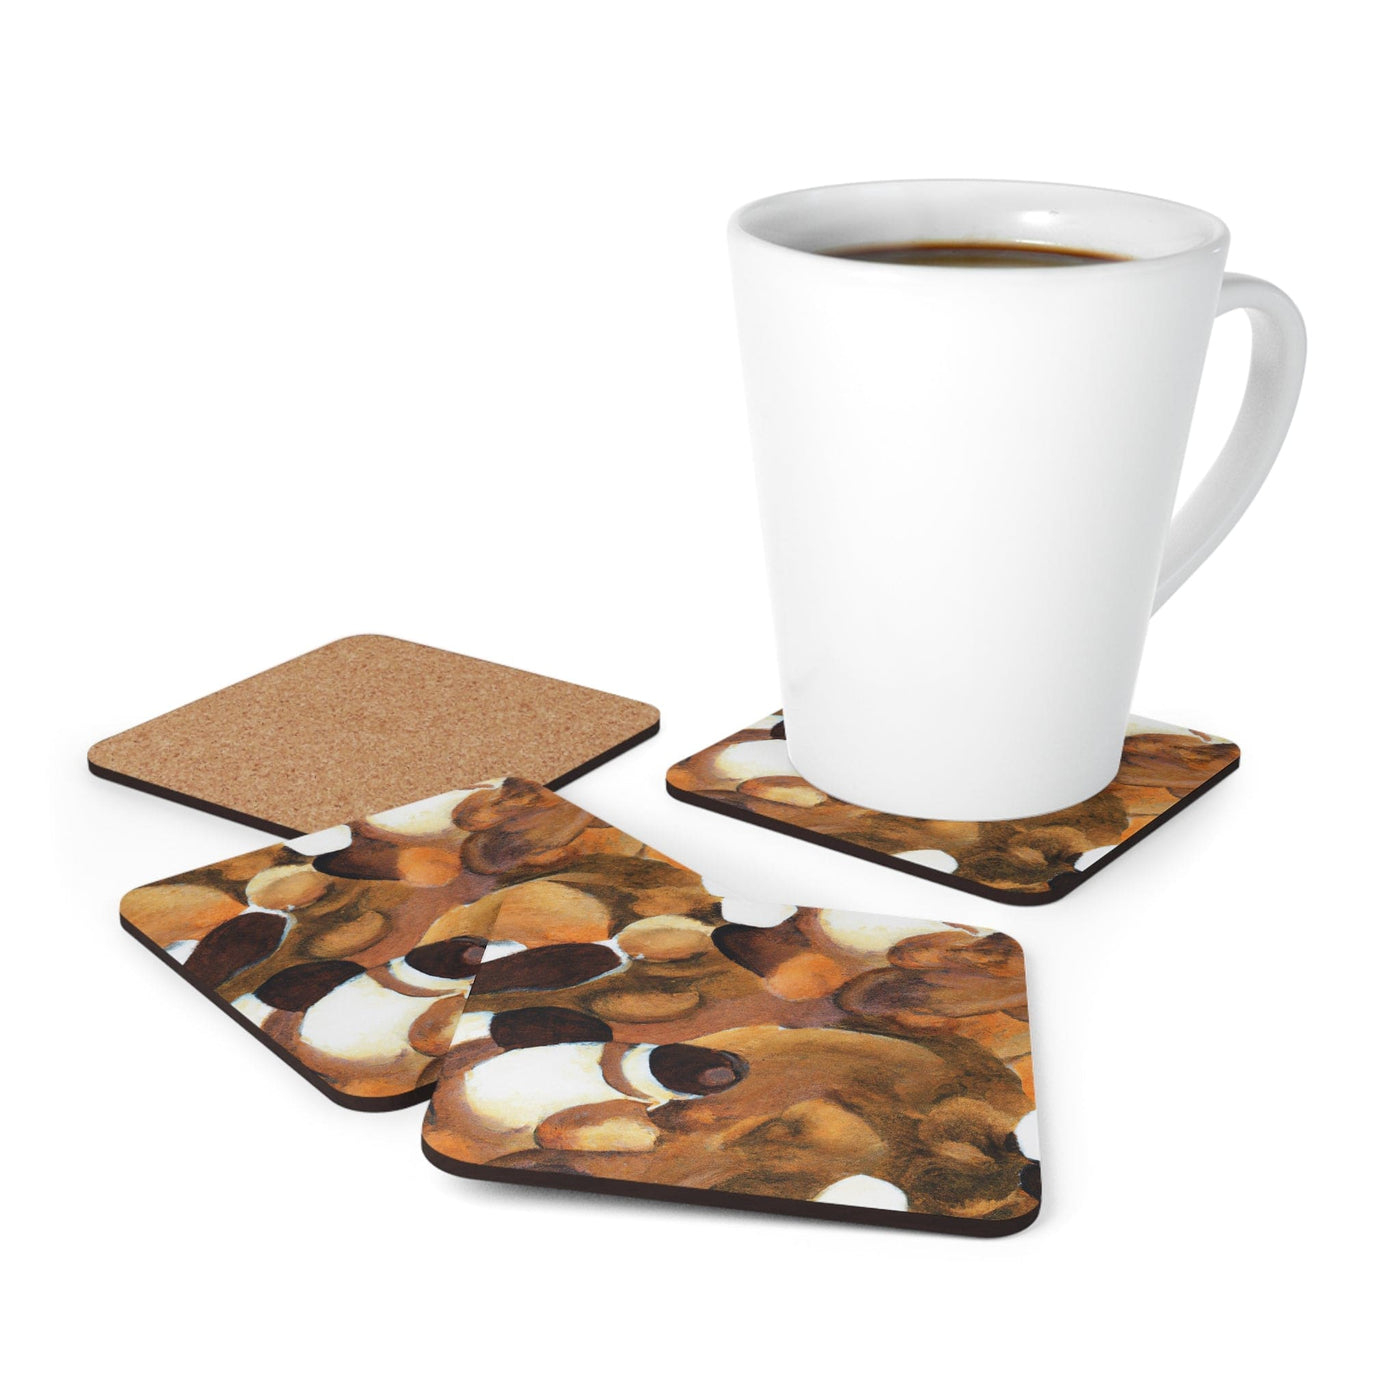 Coaster Set Of 4 For Drinks Brown White Stone Pattern - Decorative | Coasters